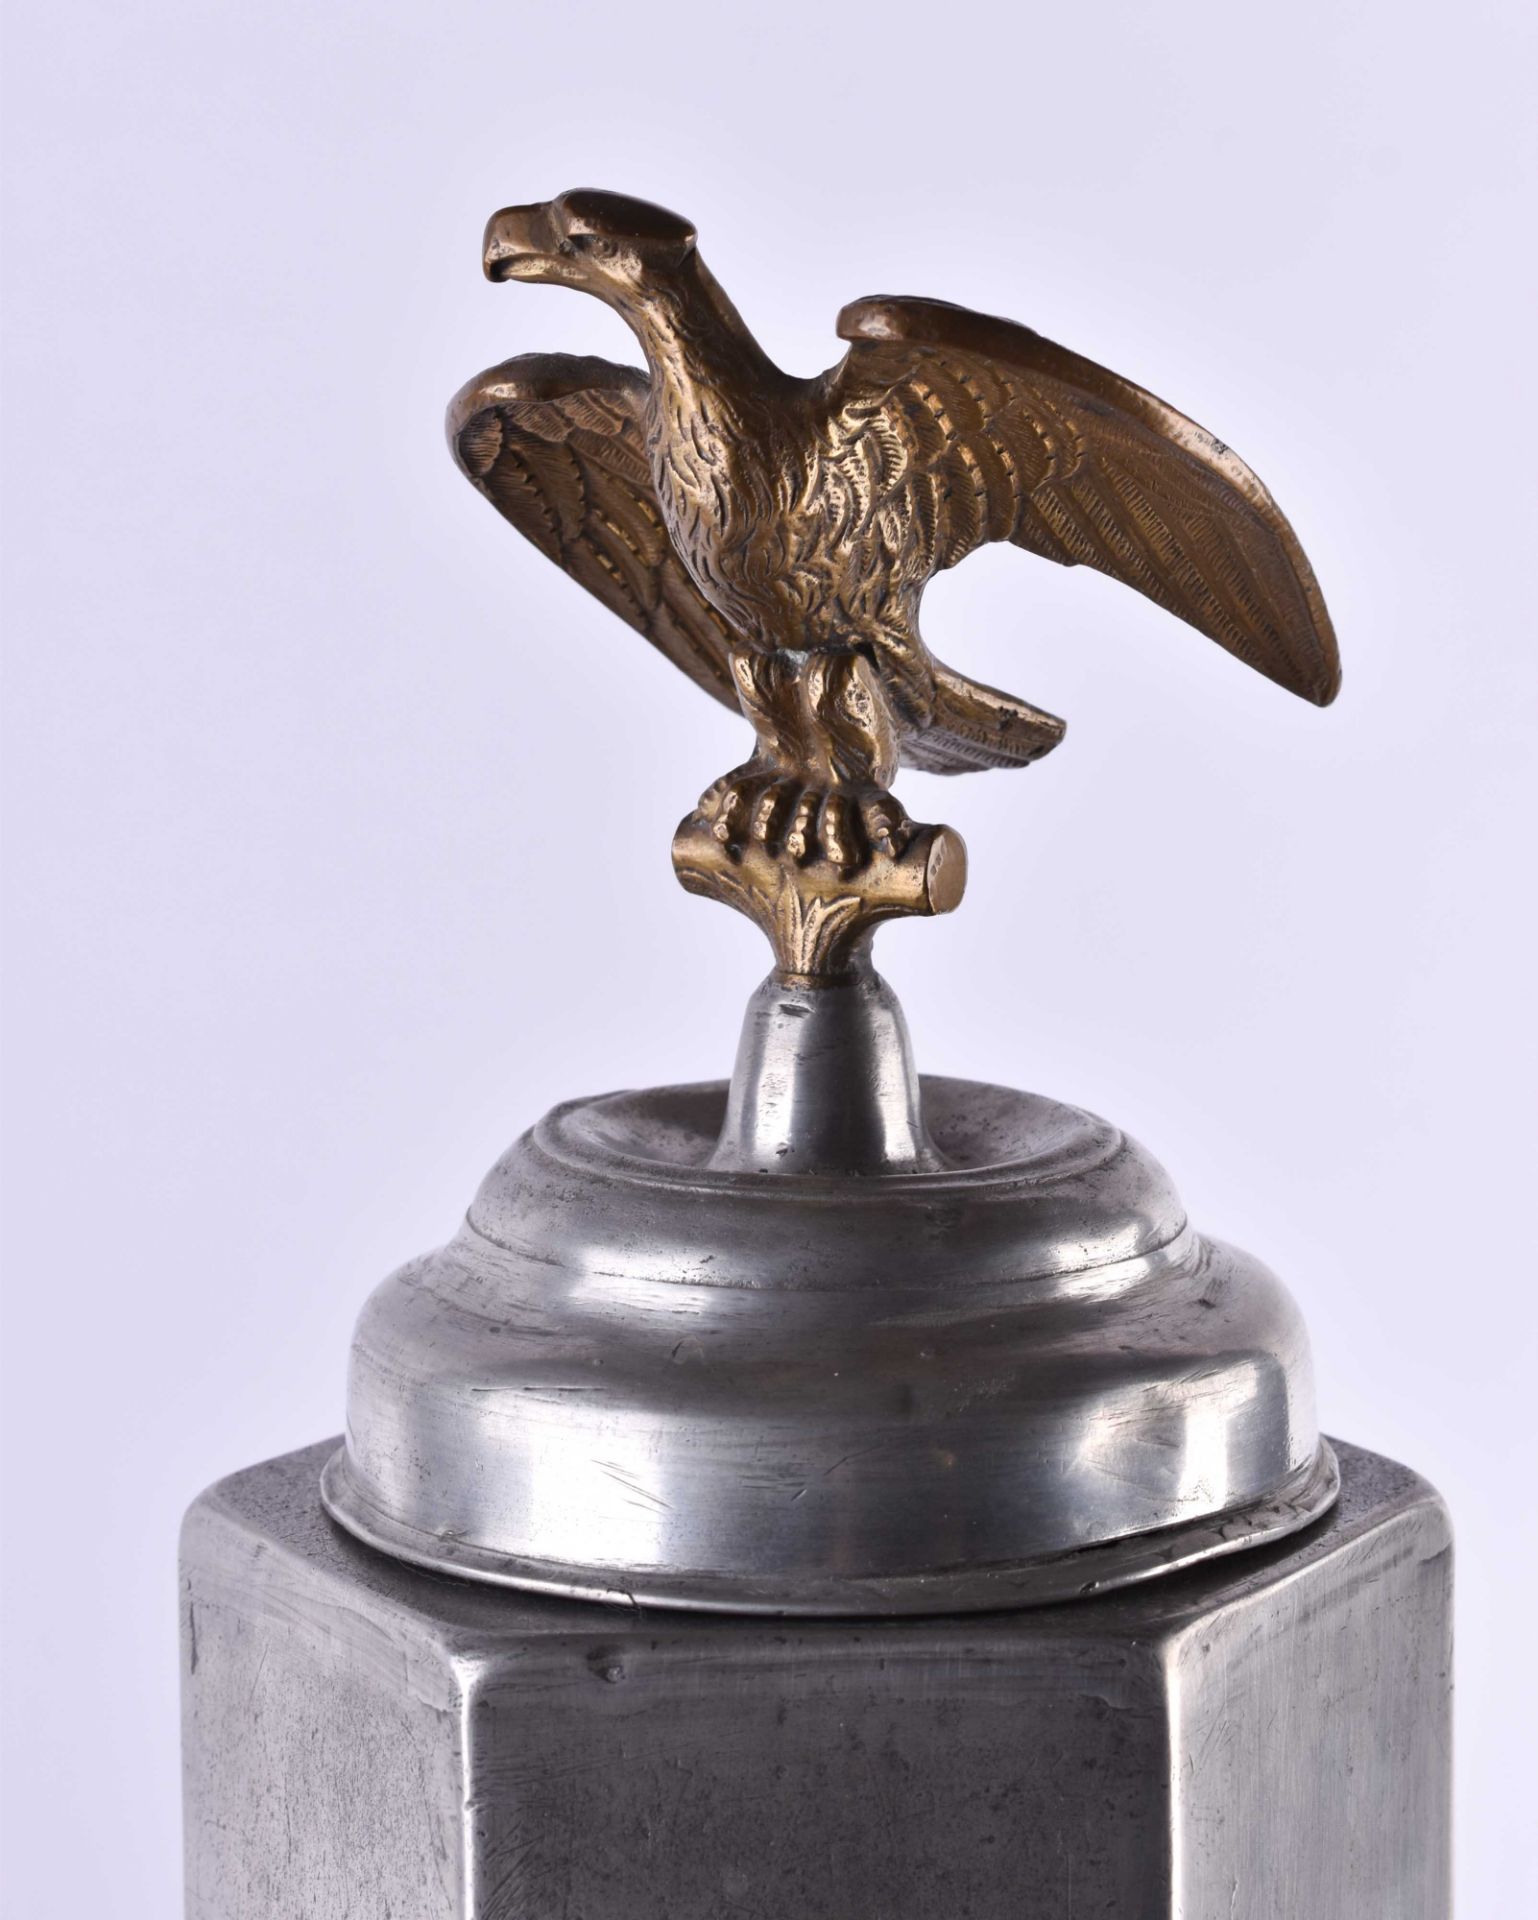 Lidded goblet pewter 19th century - Image 2 of 6